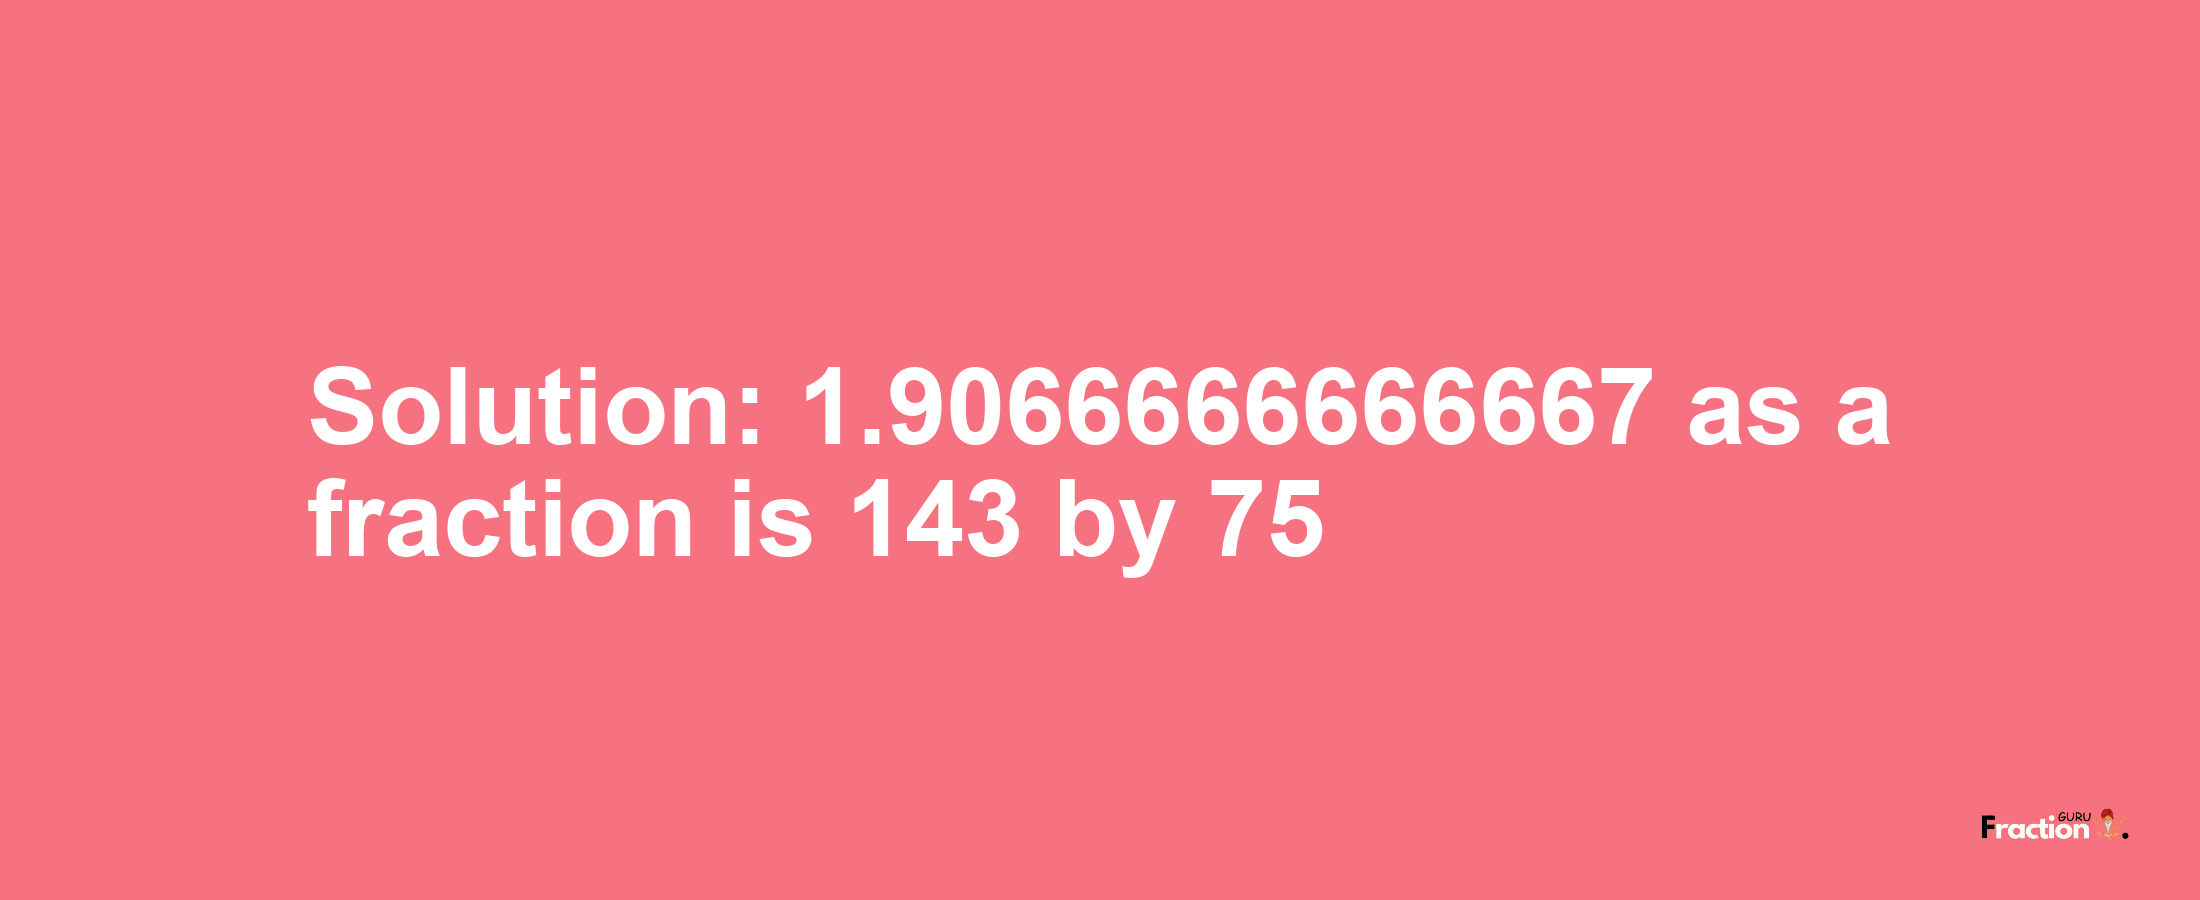 Solution:1.9066666666667 as a fraction is 143/75